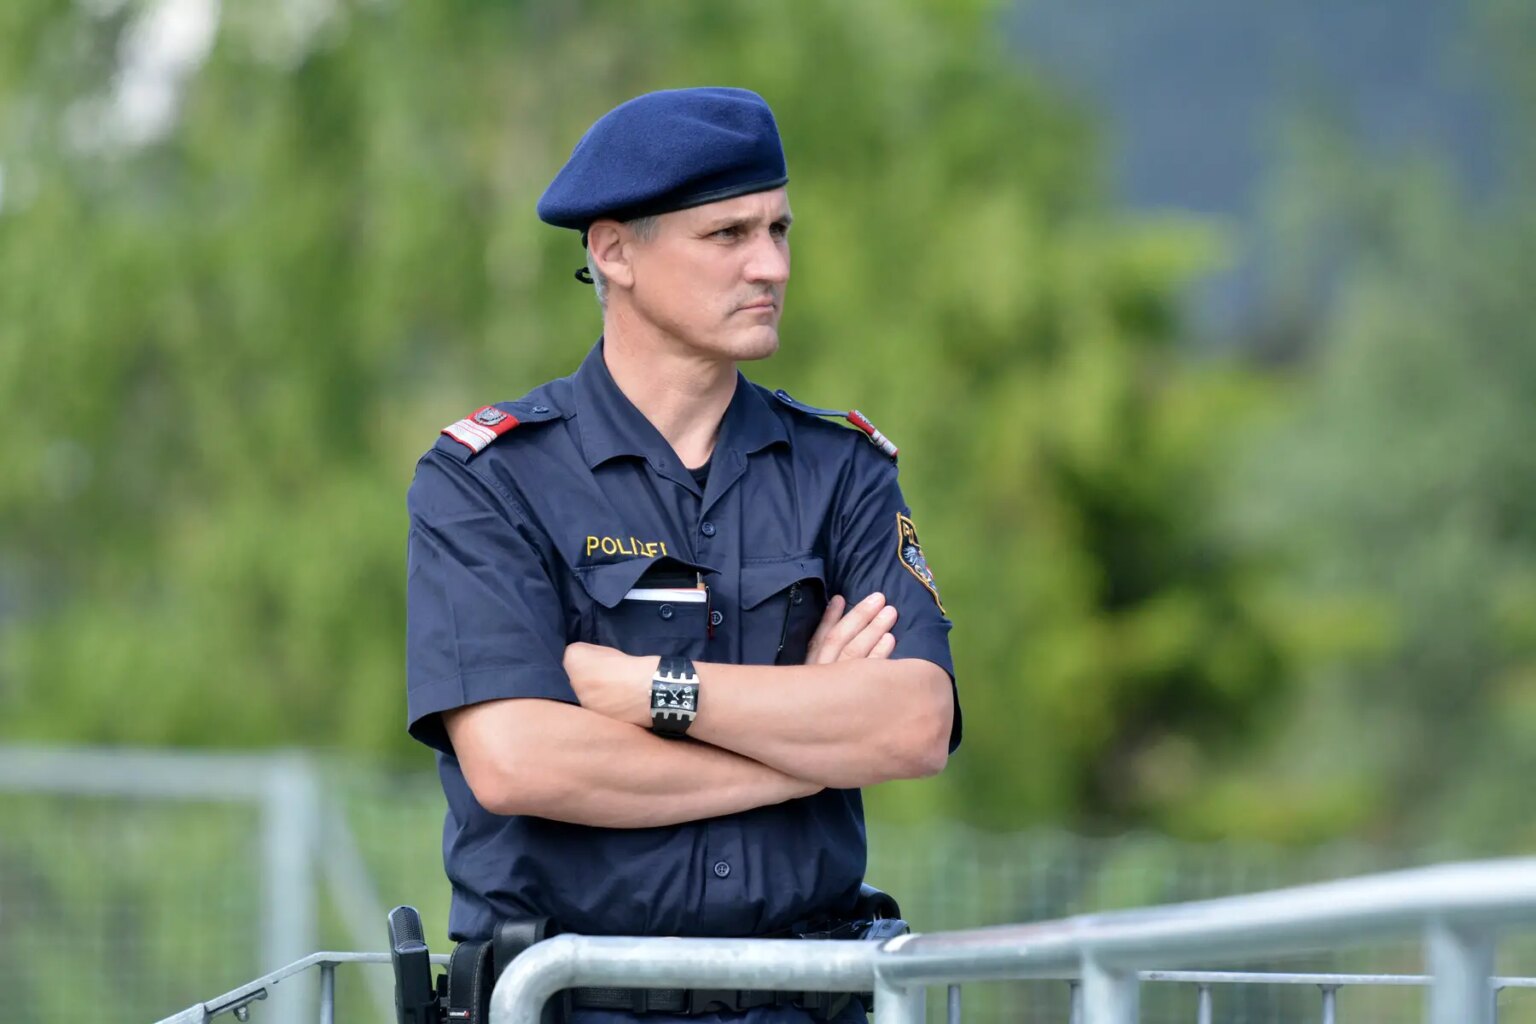 A police officer stands with his arms folded